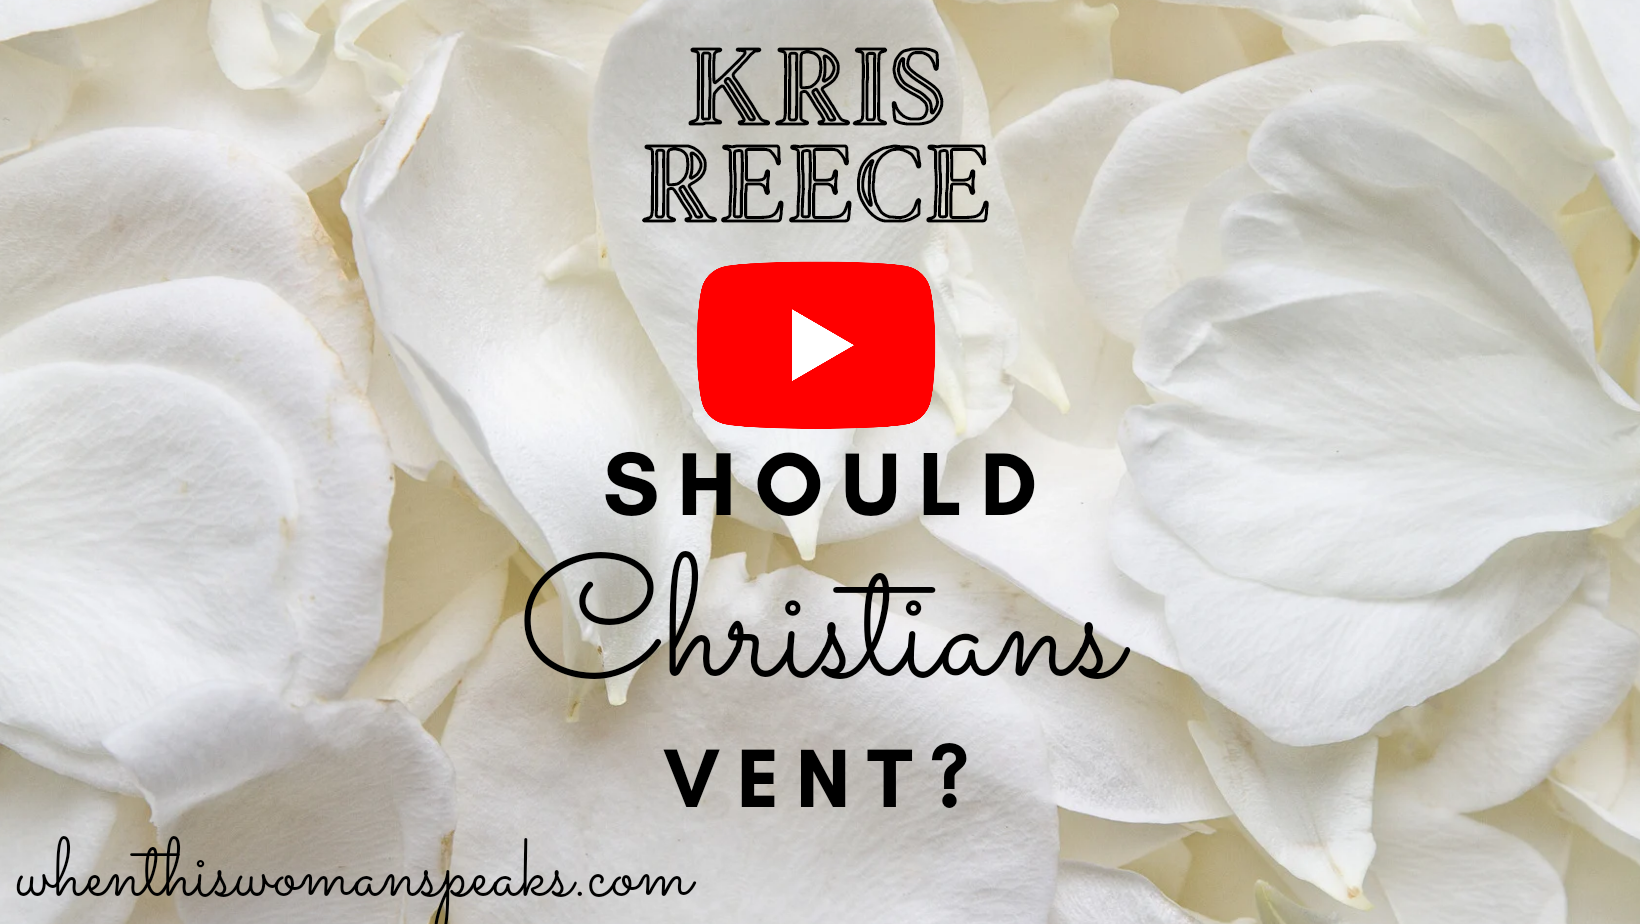 My Reaction To Kris Reece’s Video “Is It Ok for Christians to Vent?”